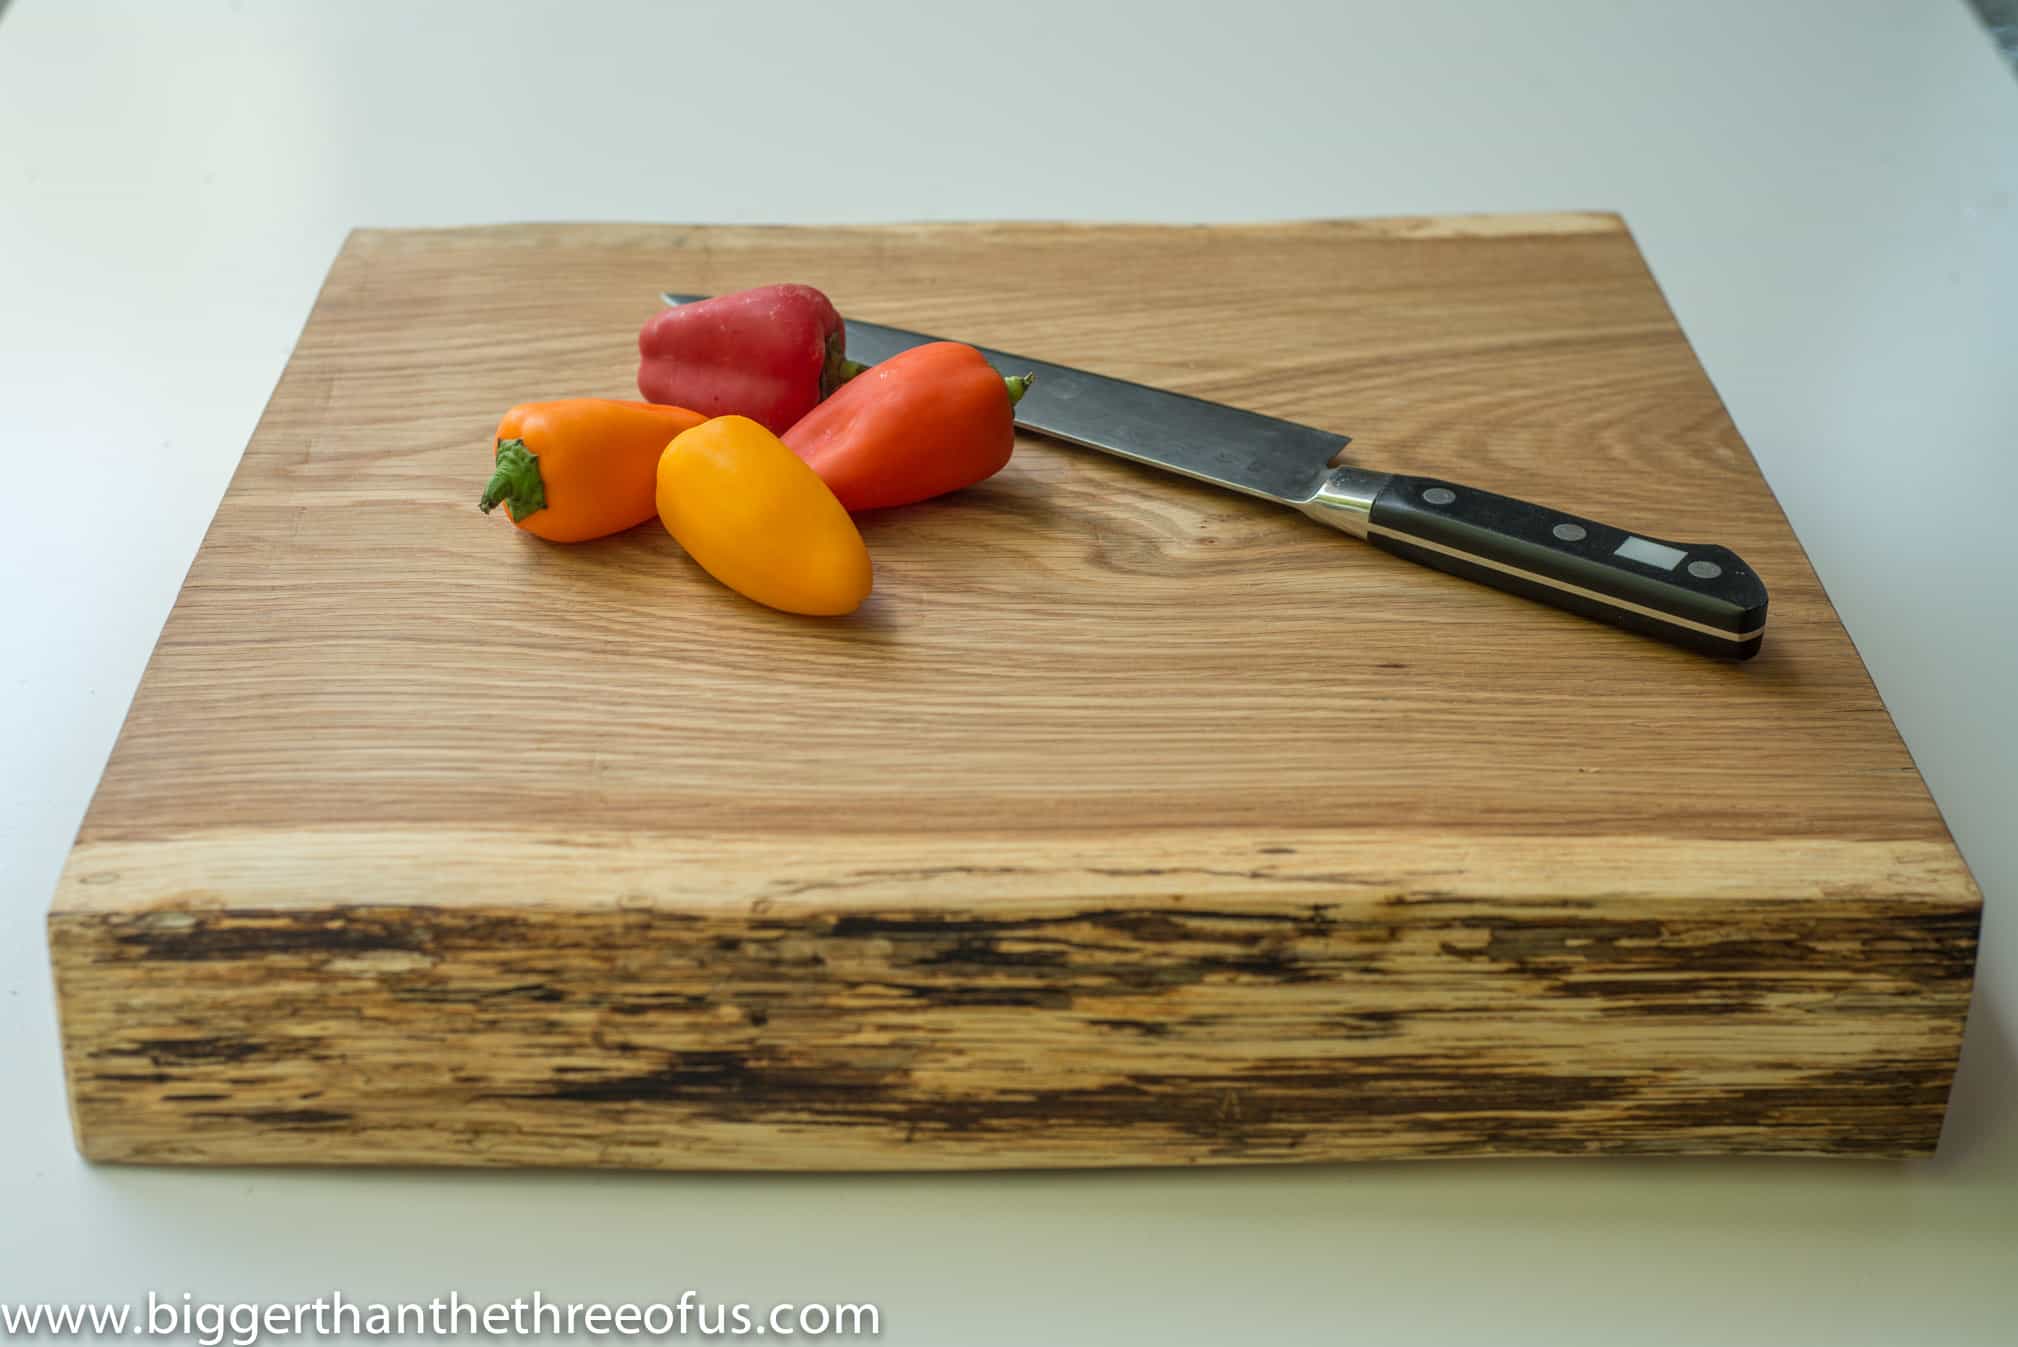 Want to make your own cutting board? This tutorial will show you how to make a cutting board... it's easy!